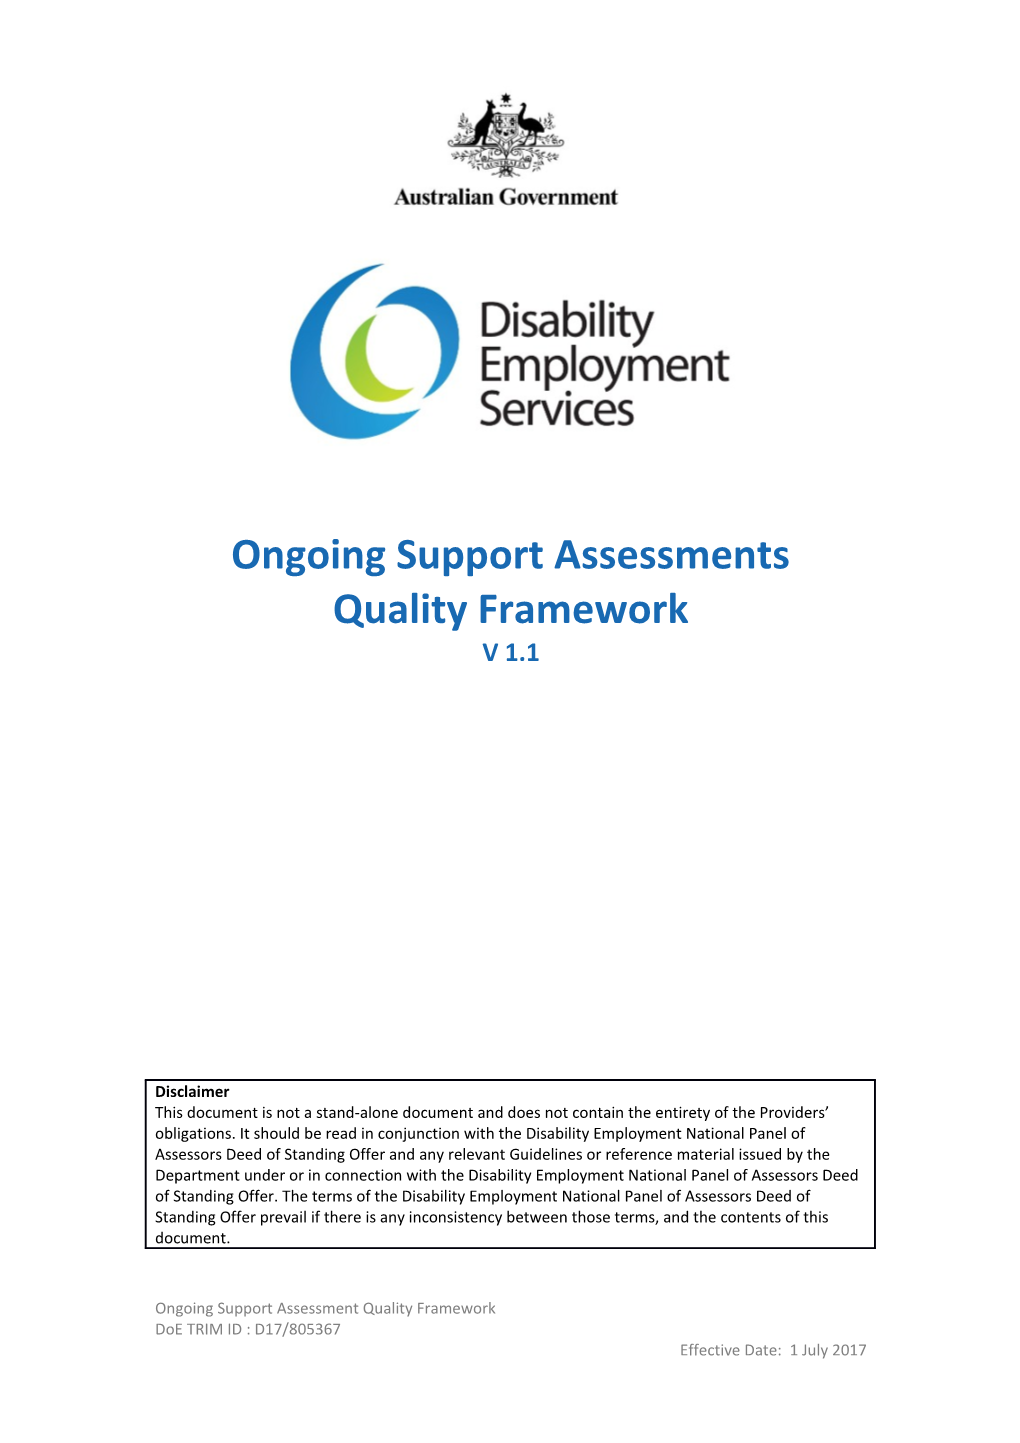 Ongoing Support Assessments